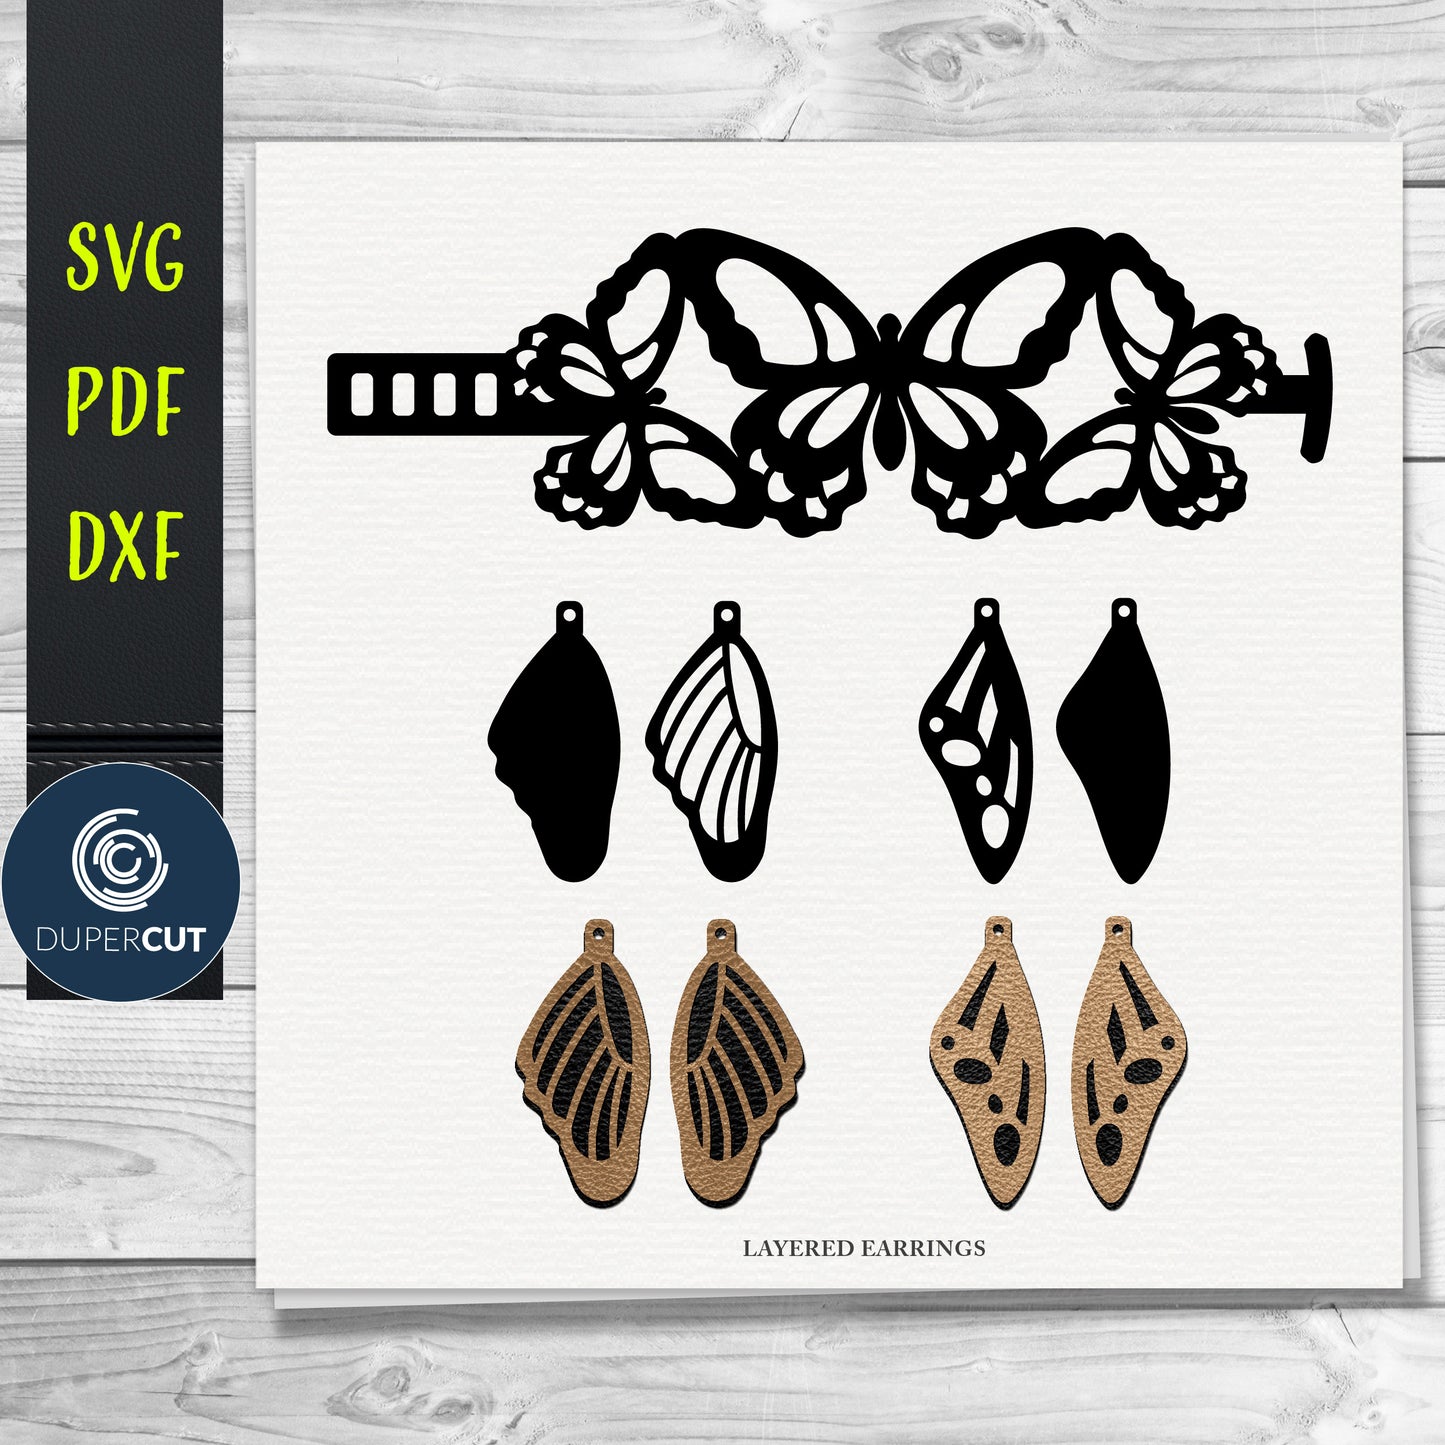 Layered Butterfly Wings Leather Earrings and Bracelet  SVG PDF DXF vector files. Jewellery making template for laser and cutting machines - Glowforge, Cricut, Silhouette Cameo.